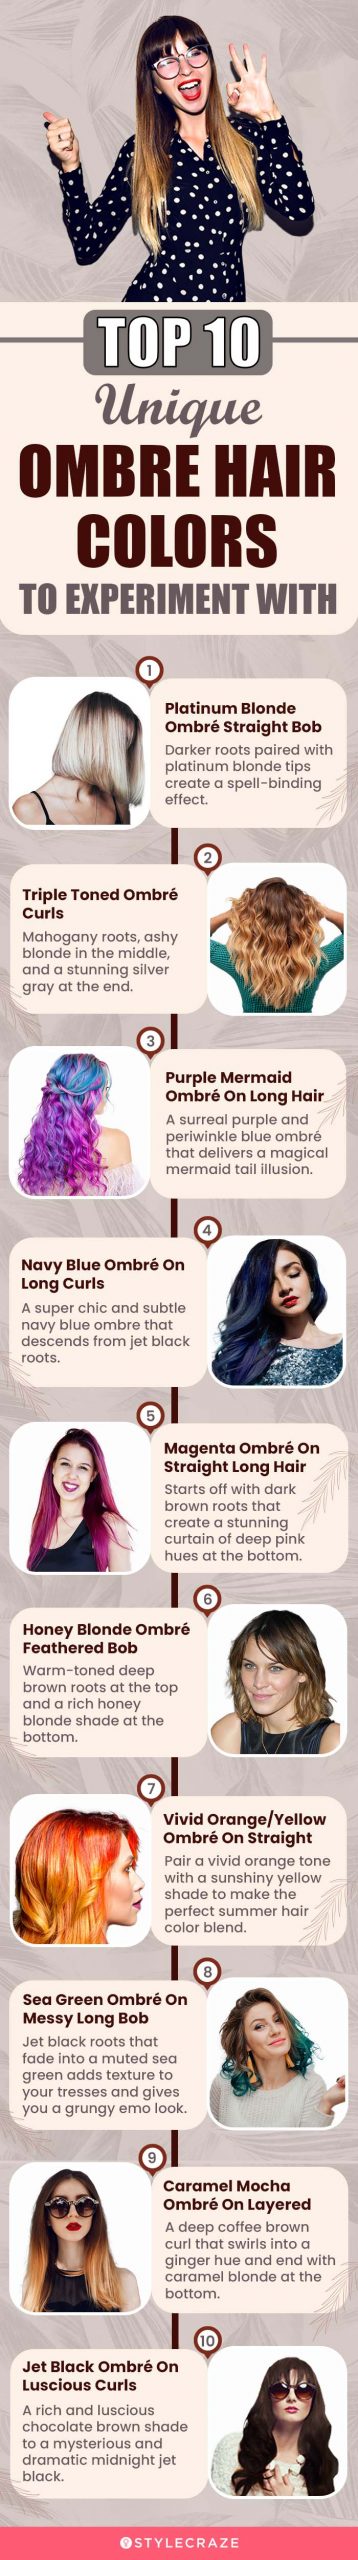 top 10 unique ombre hair colors to experiment with [infographic]